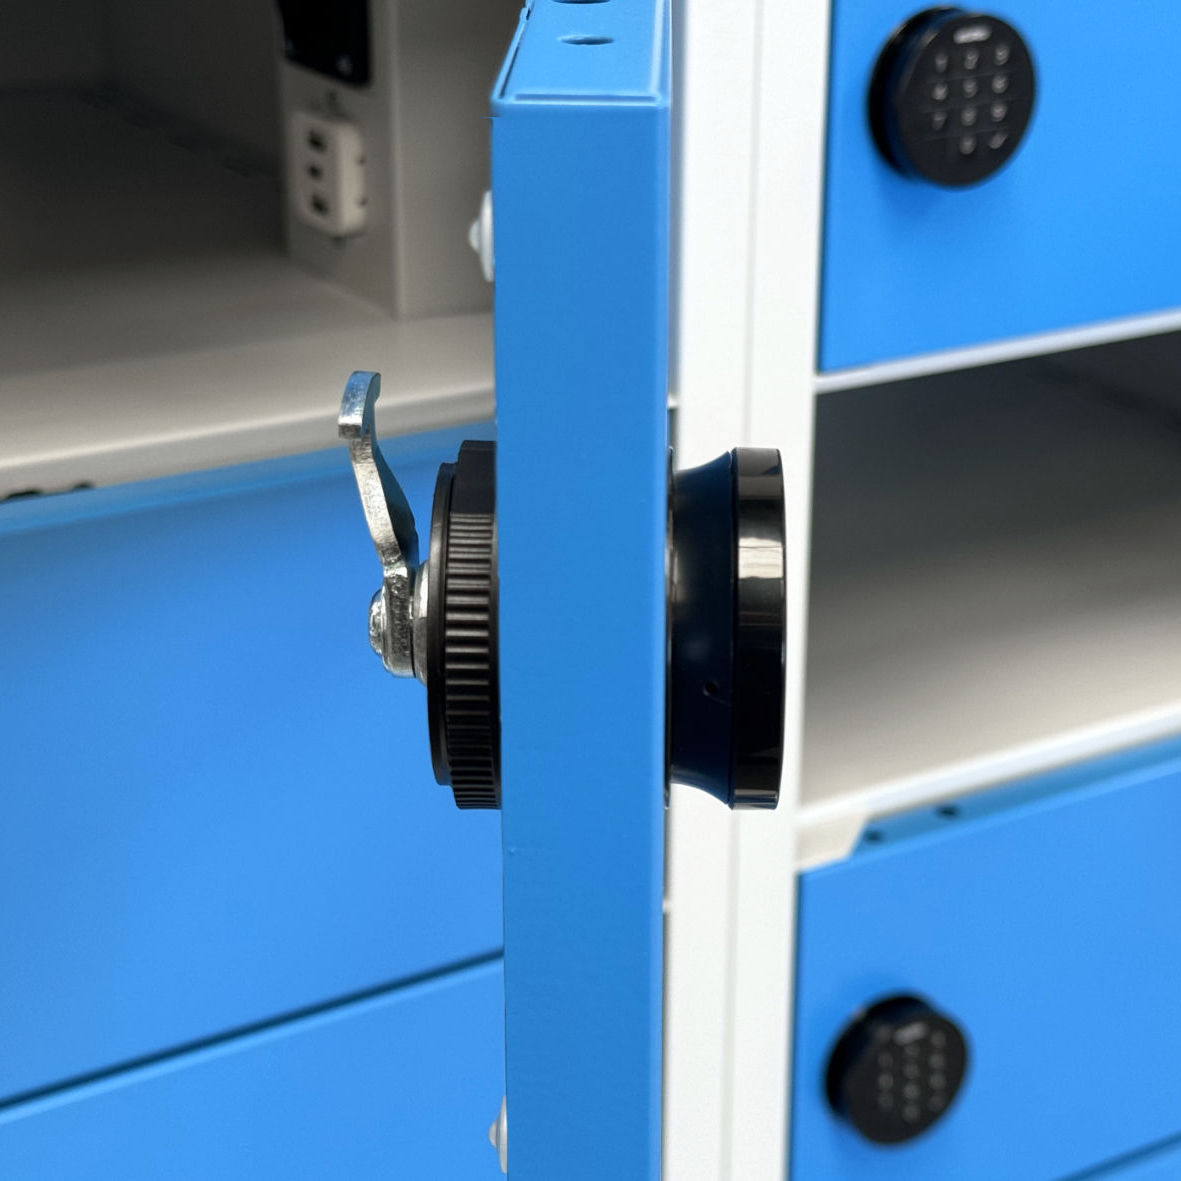 The charging boxes are secured with a hook and loop fastener